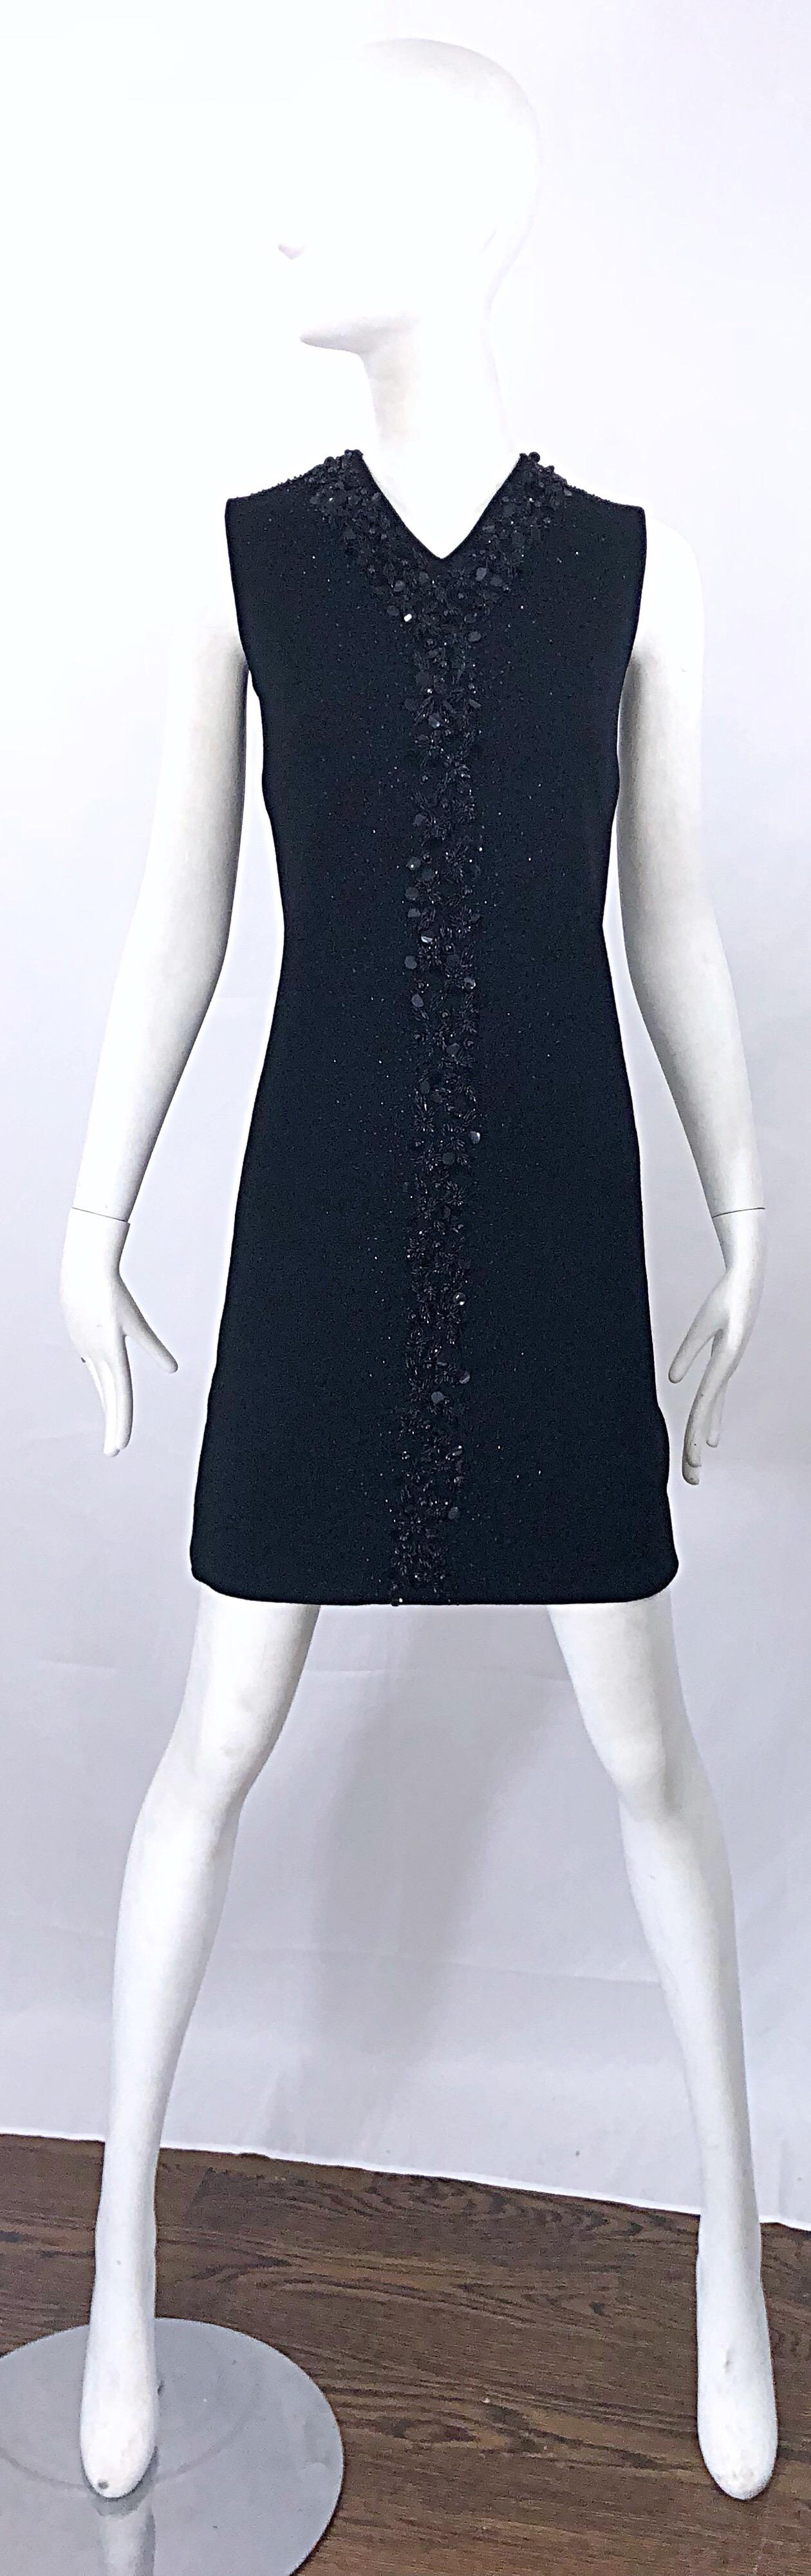 Utterly chic vintage 1960s ST. ANDREWS black zephyr wool British Hong Kong beaded and sequined shift dress! Features 100% zephyr wool that has some stretch, and is fully lined. Thousands of hand-sewn black sequins, beads and paillettes throughout